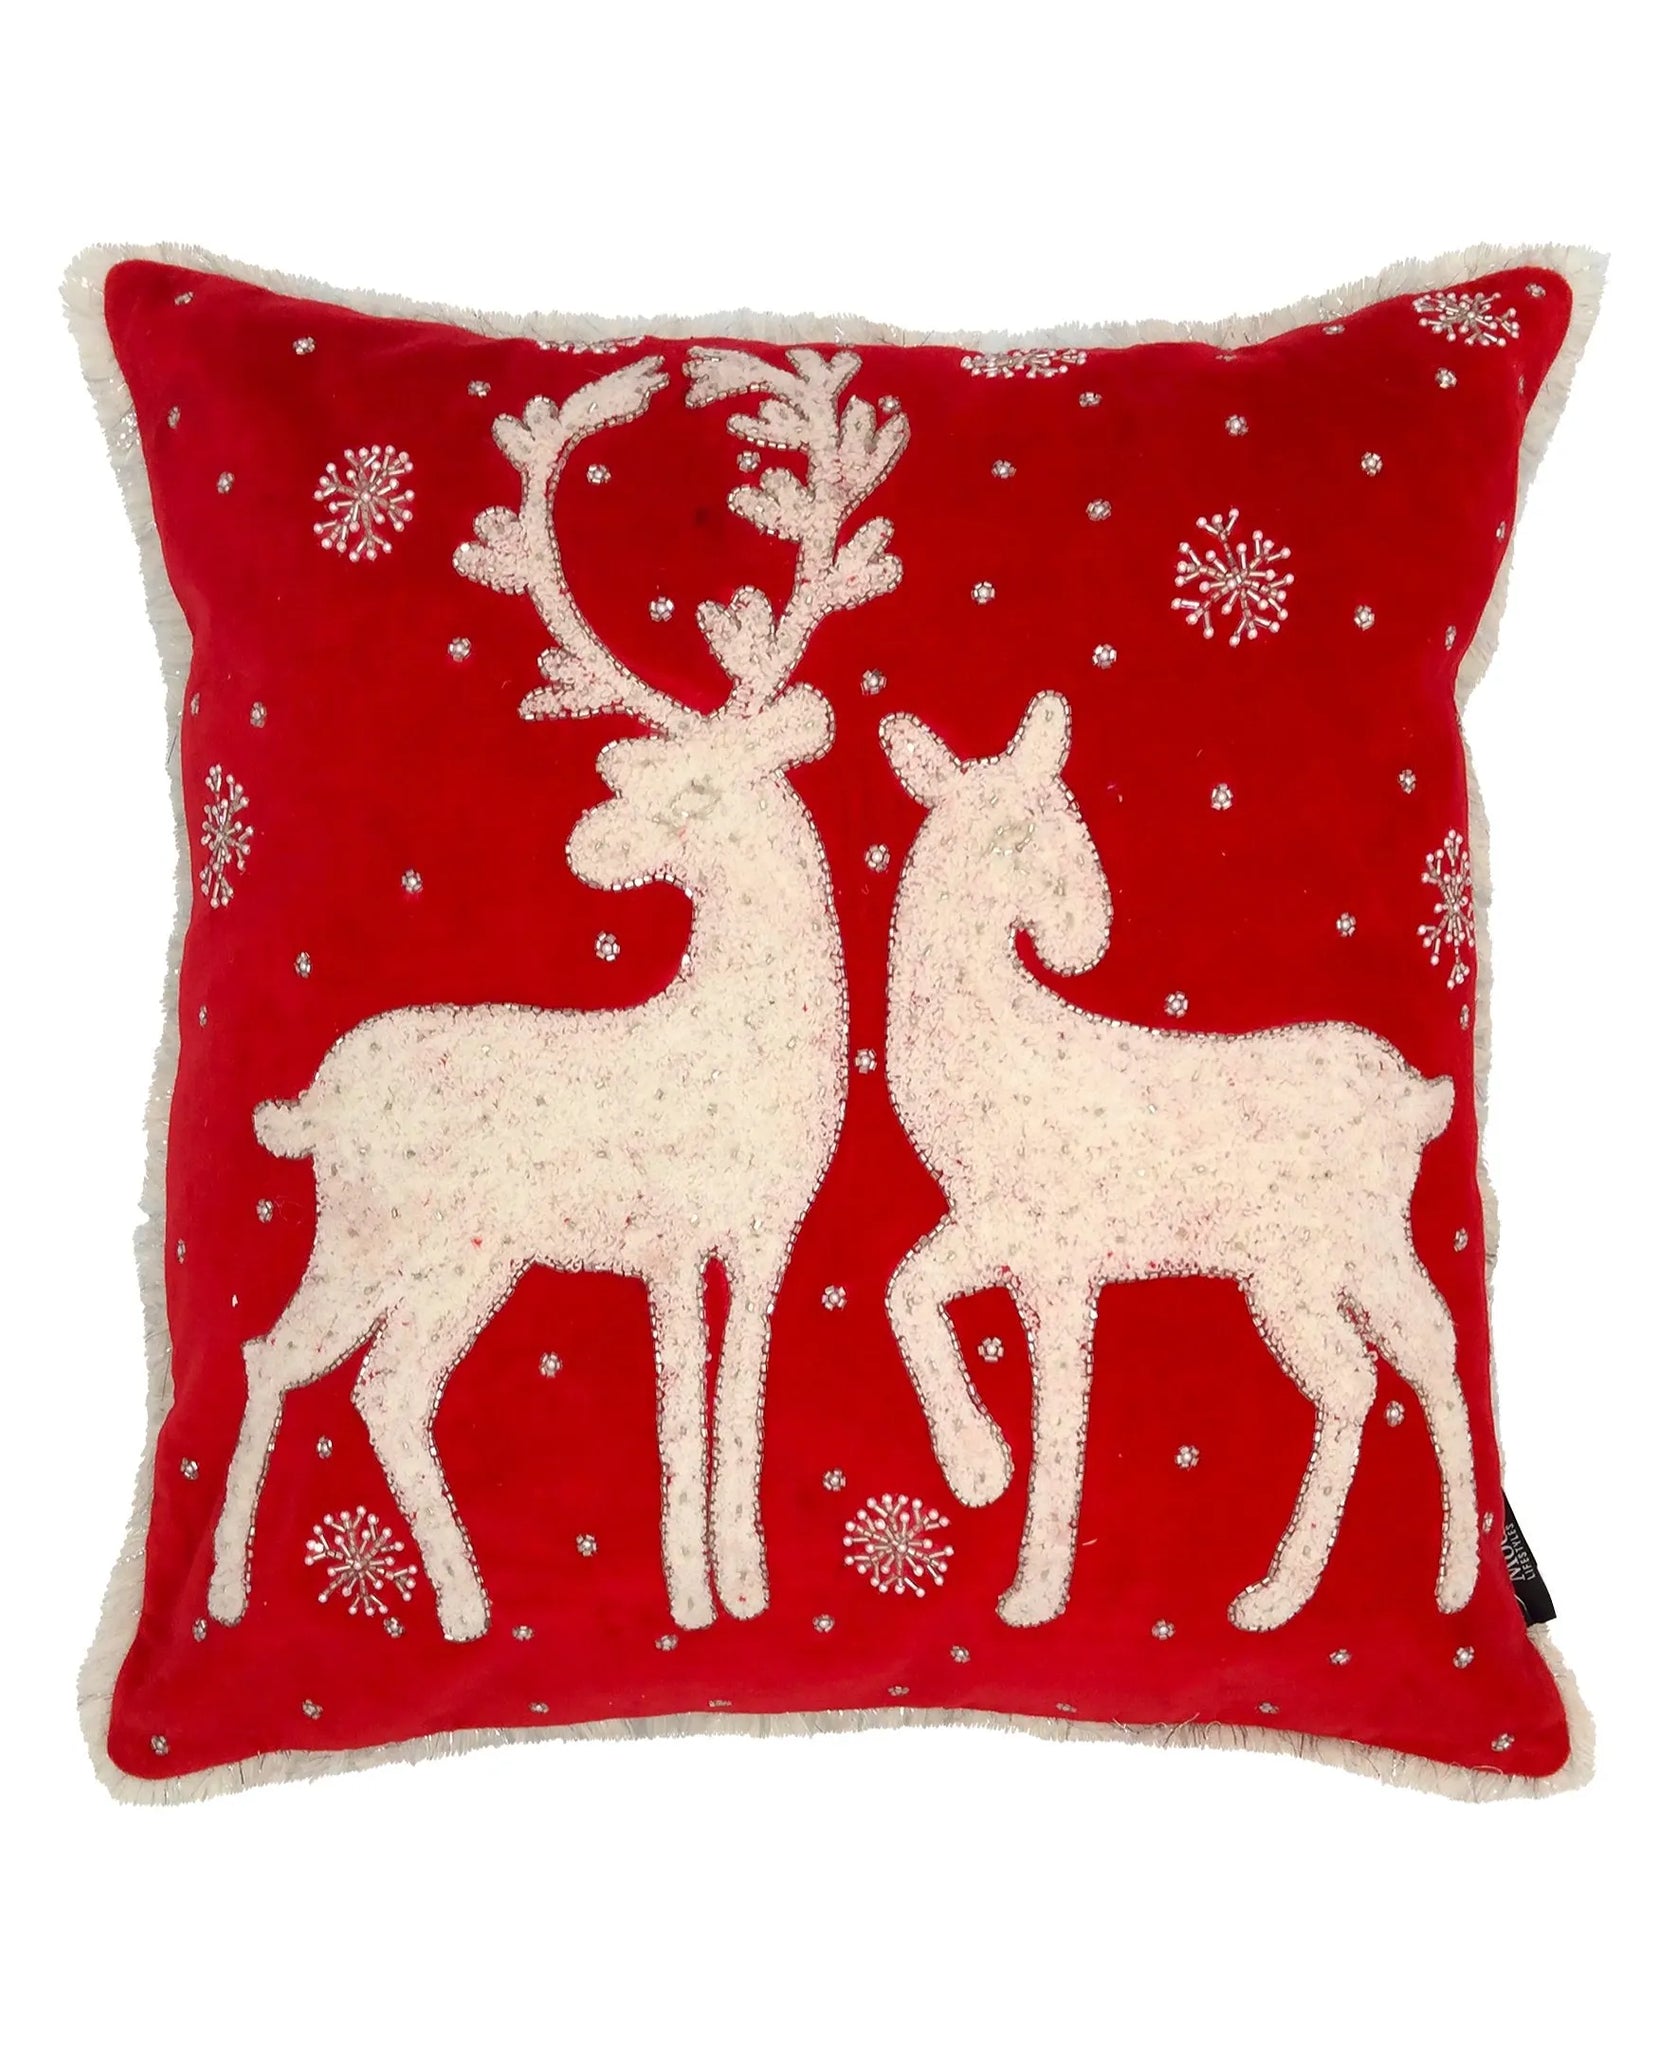 20” Red & White Handloomed Christmas Throw Pillow with Reindeer